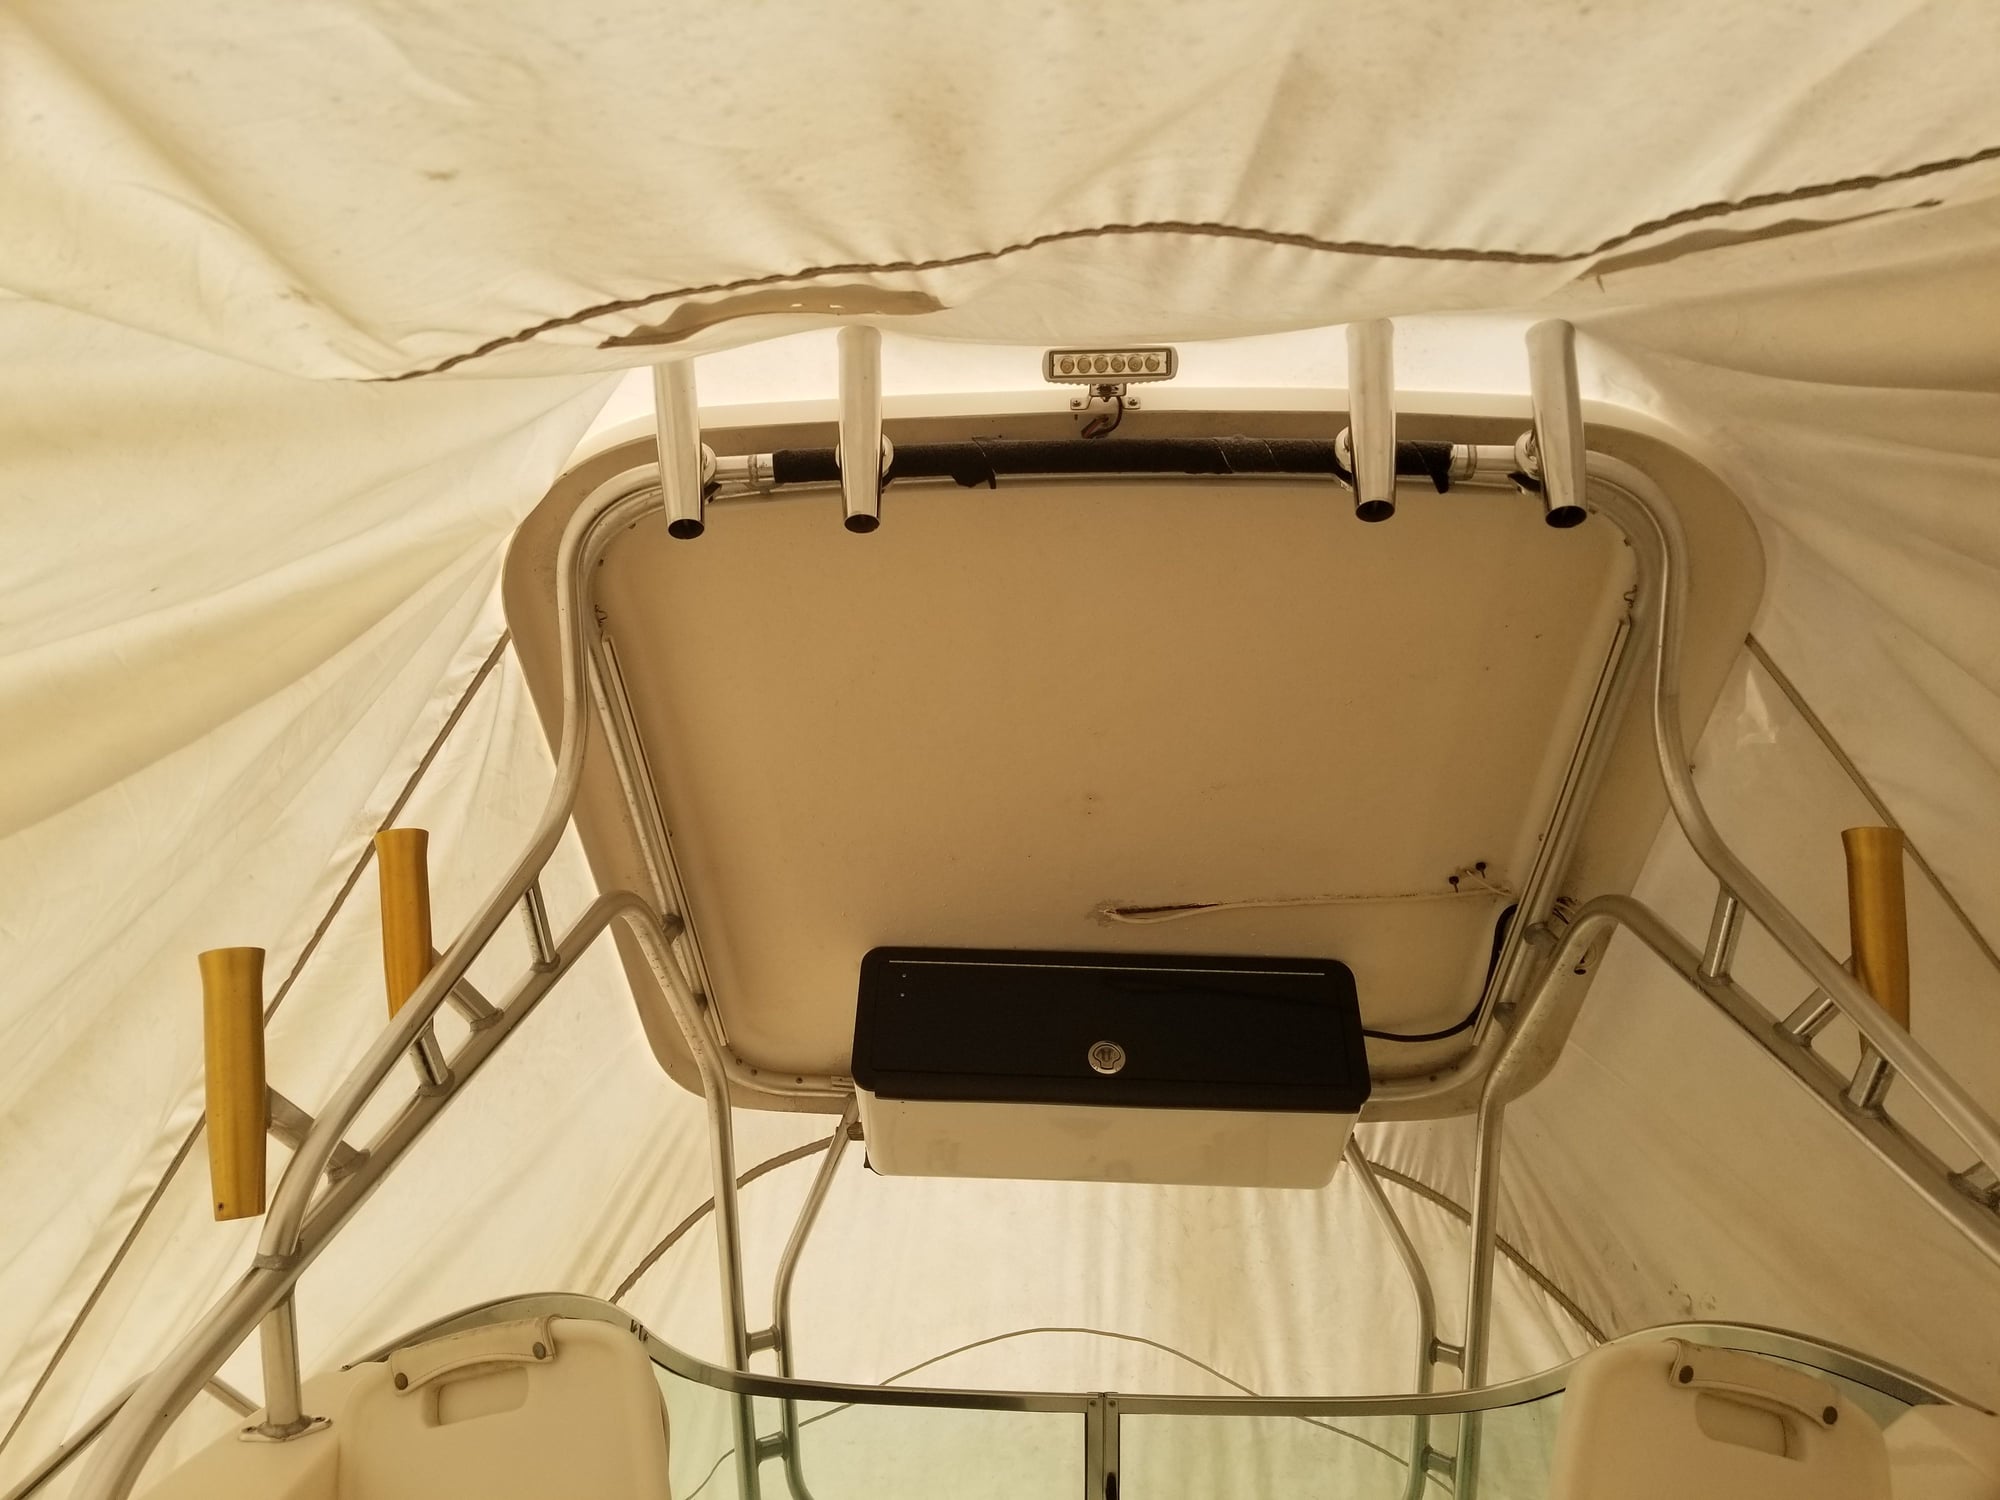 Outrigger mounts - The Hull Truth - Boating and Fishing Forum